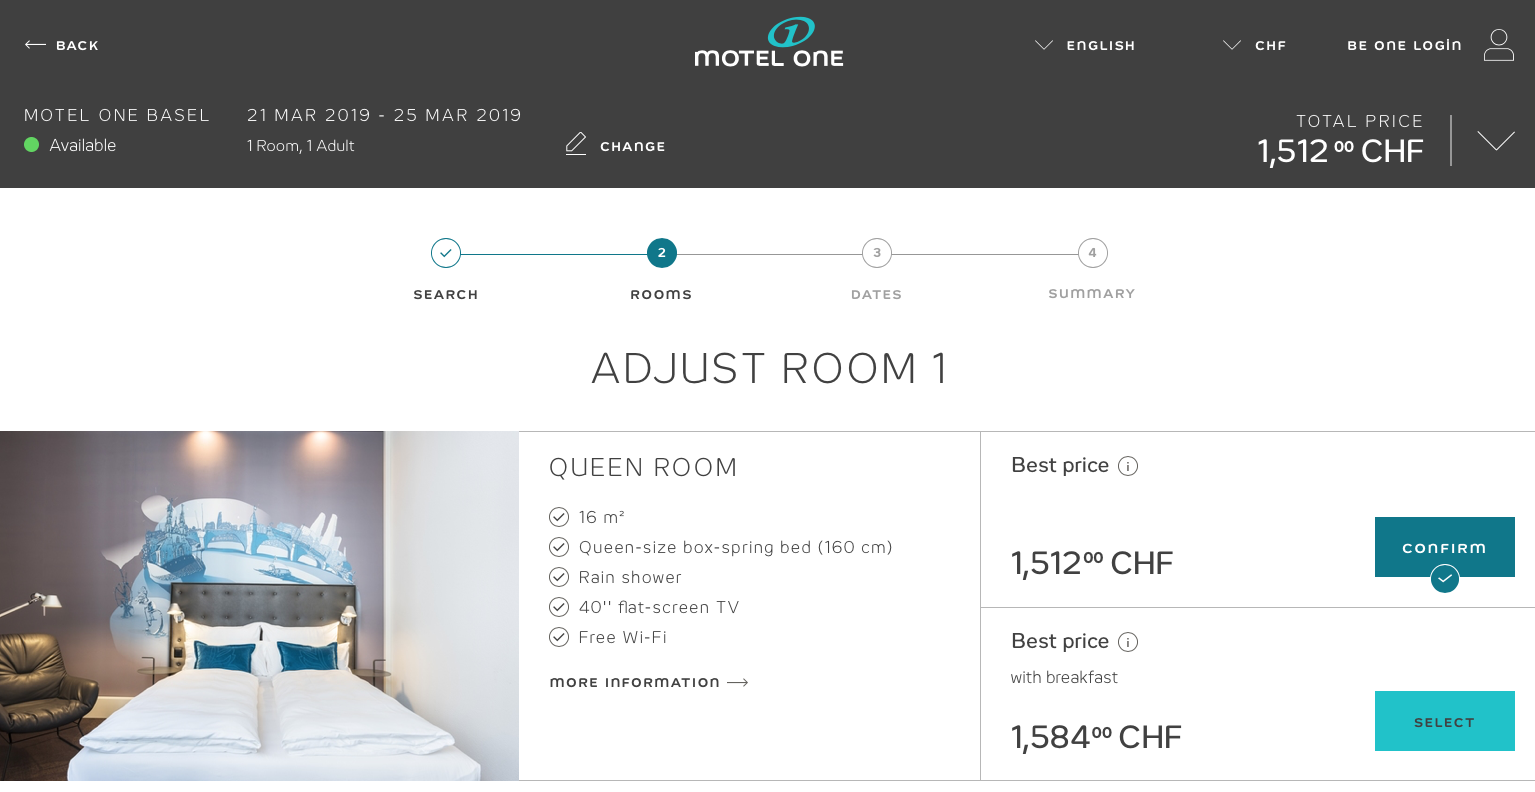 Motel One Baselworld 2019 cost